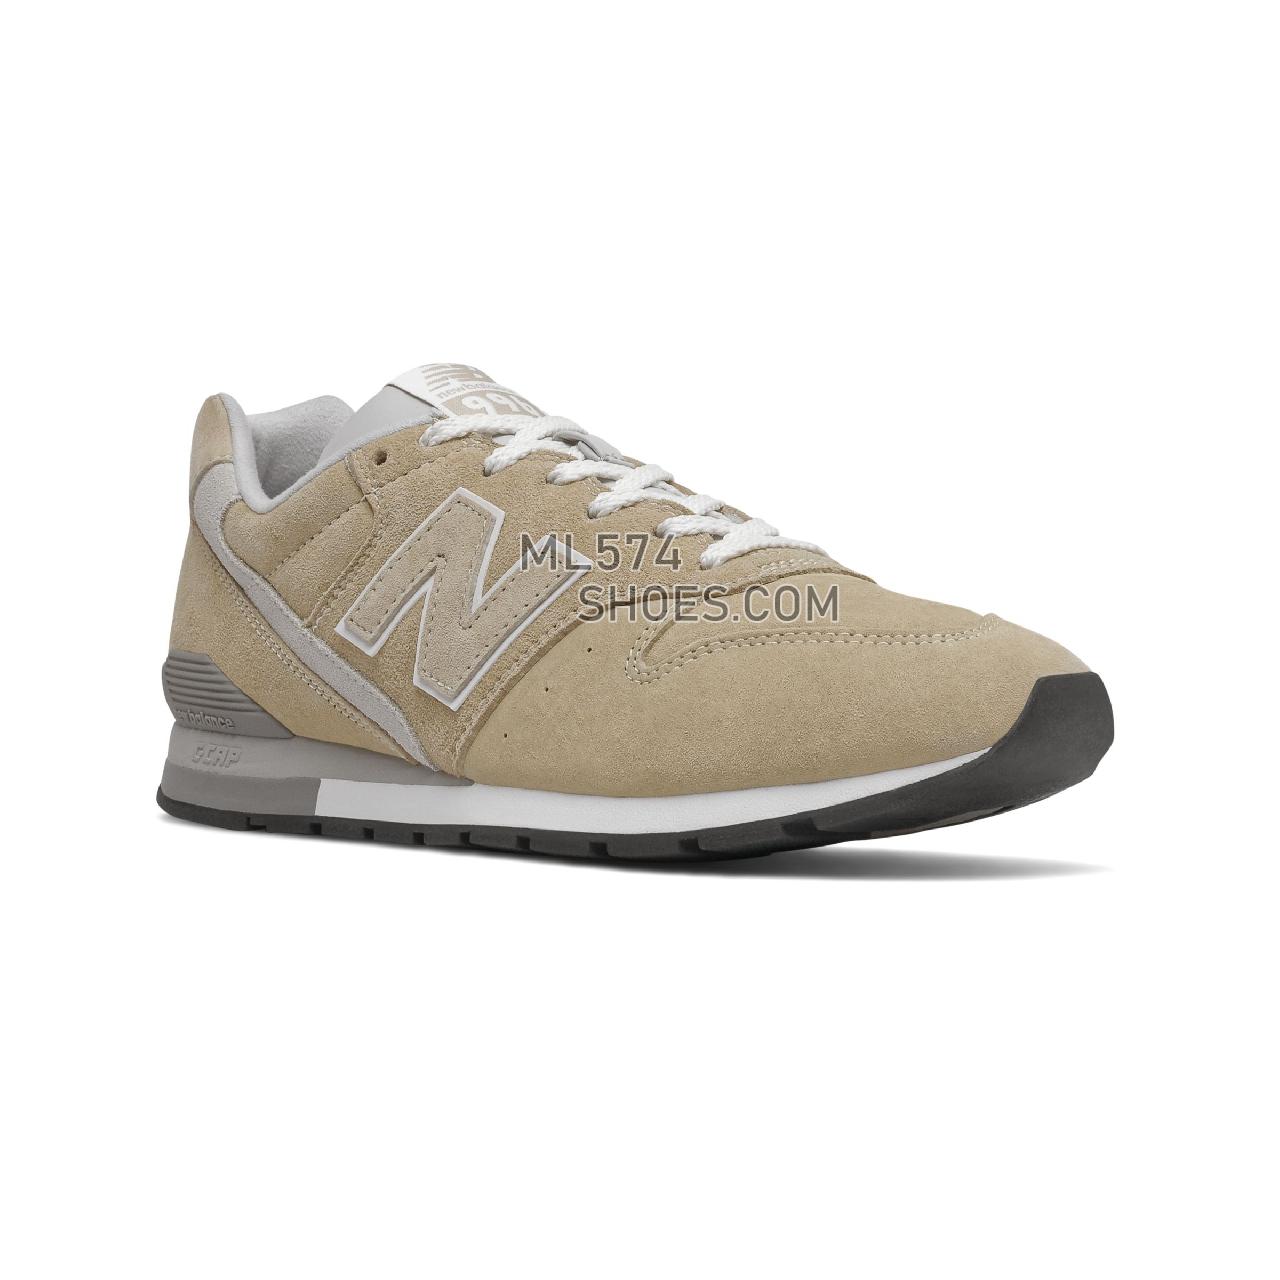 New Balance 996v2 - Men's Classic Sneakers - Incense with Rain Cloud - CM996WE2